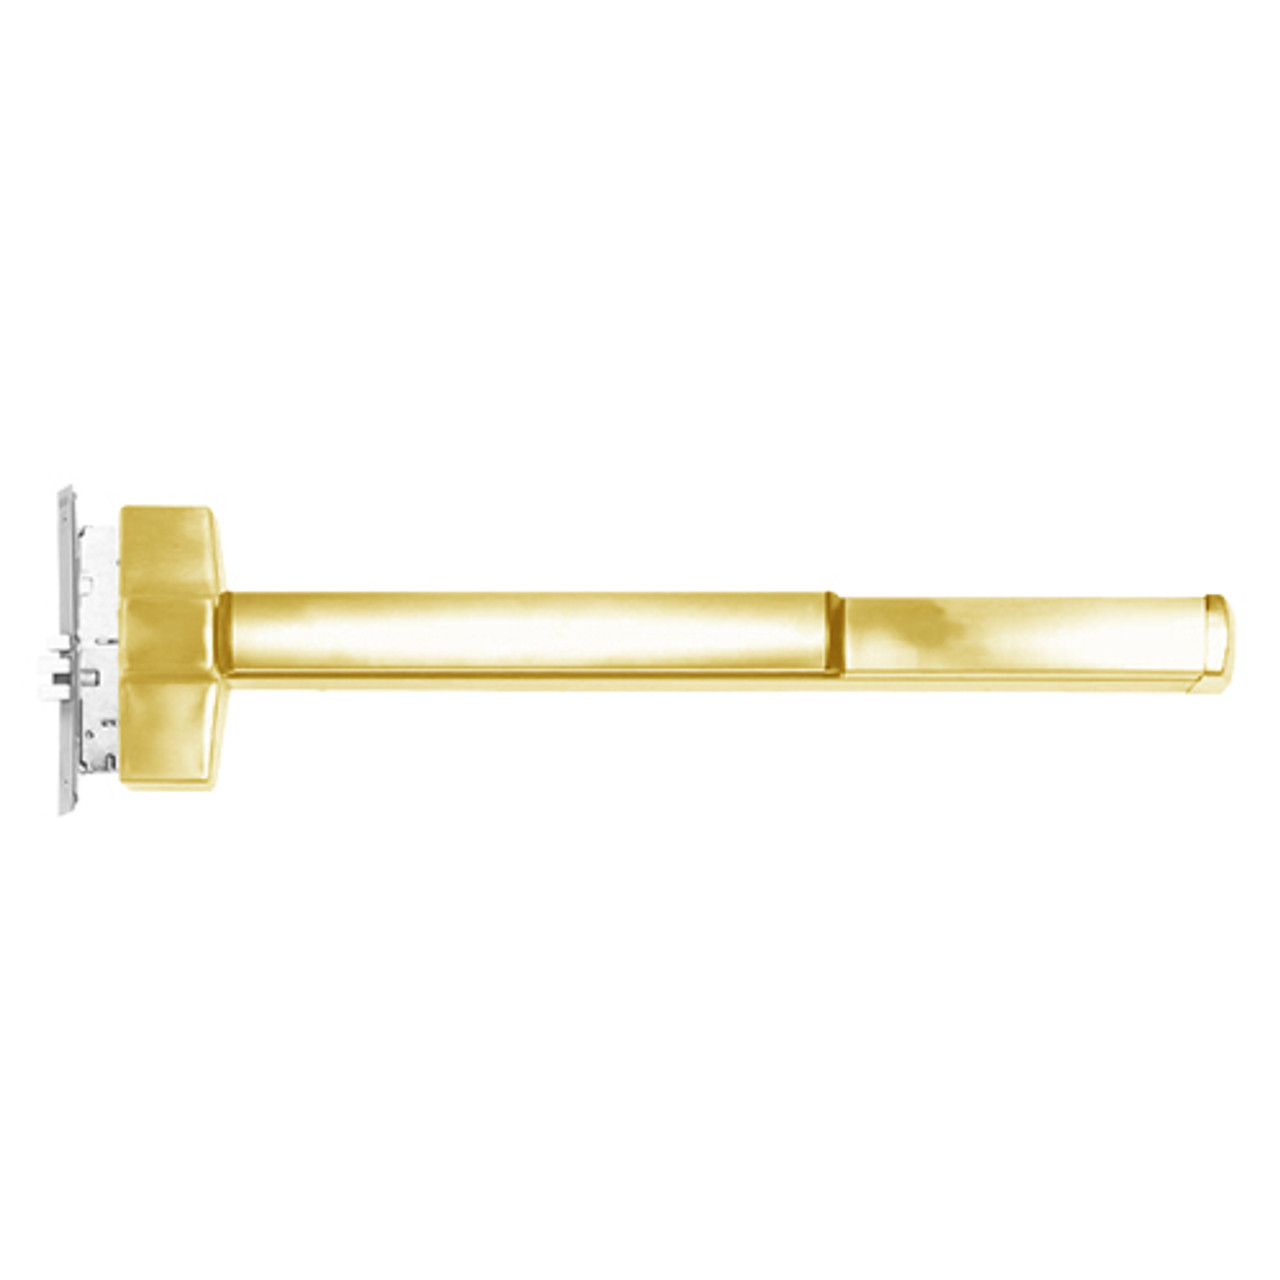 ED5600AT-605-W048-LHR Corbin ED5600 Series Fire Rated Mortise Exit Device in Bright Brass Finish